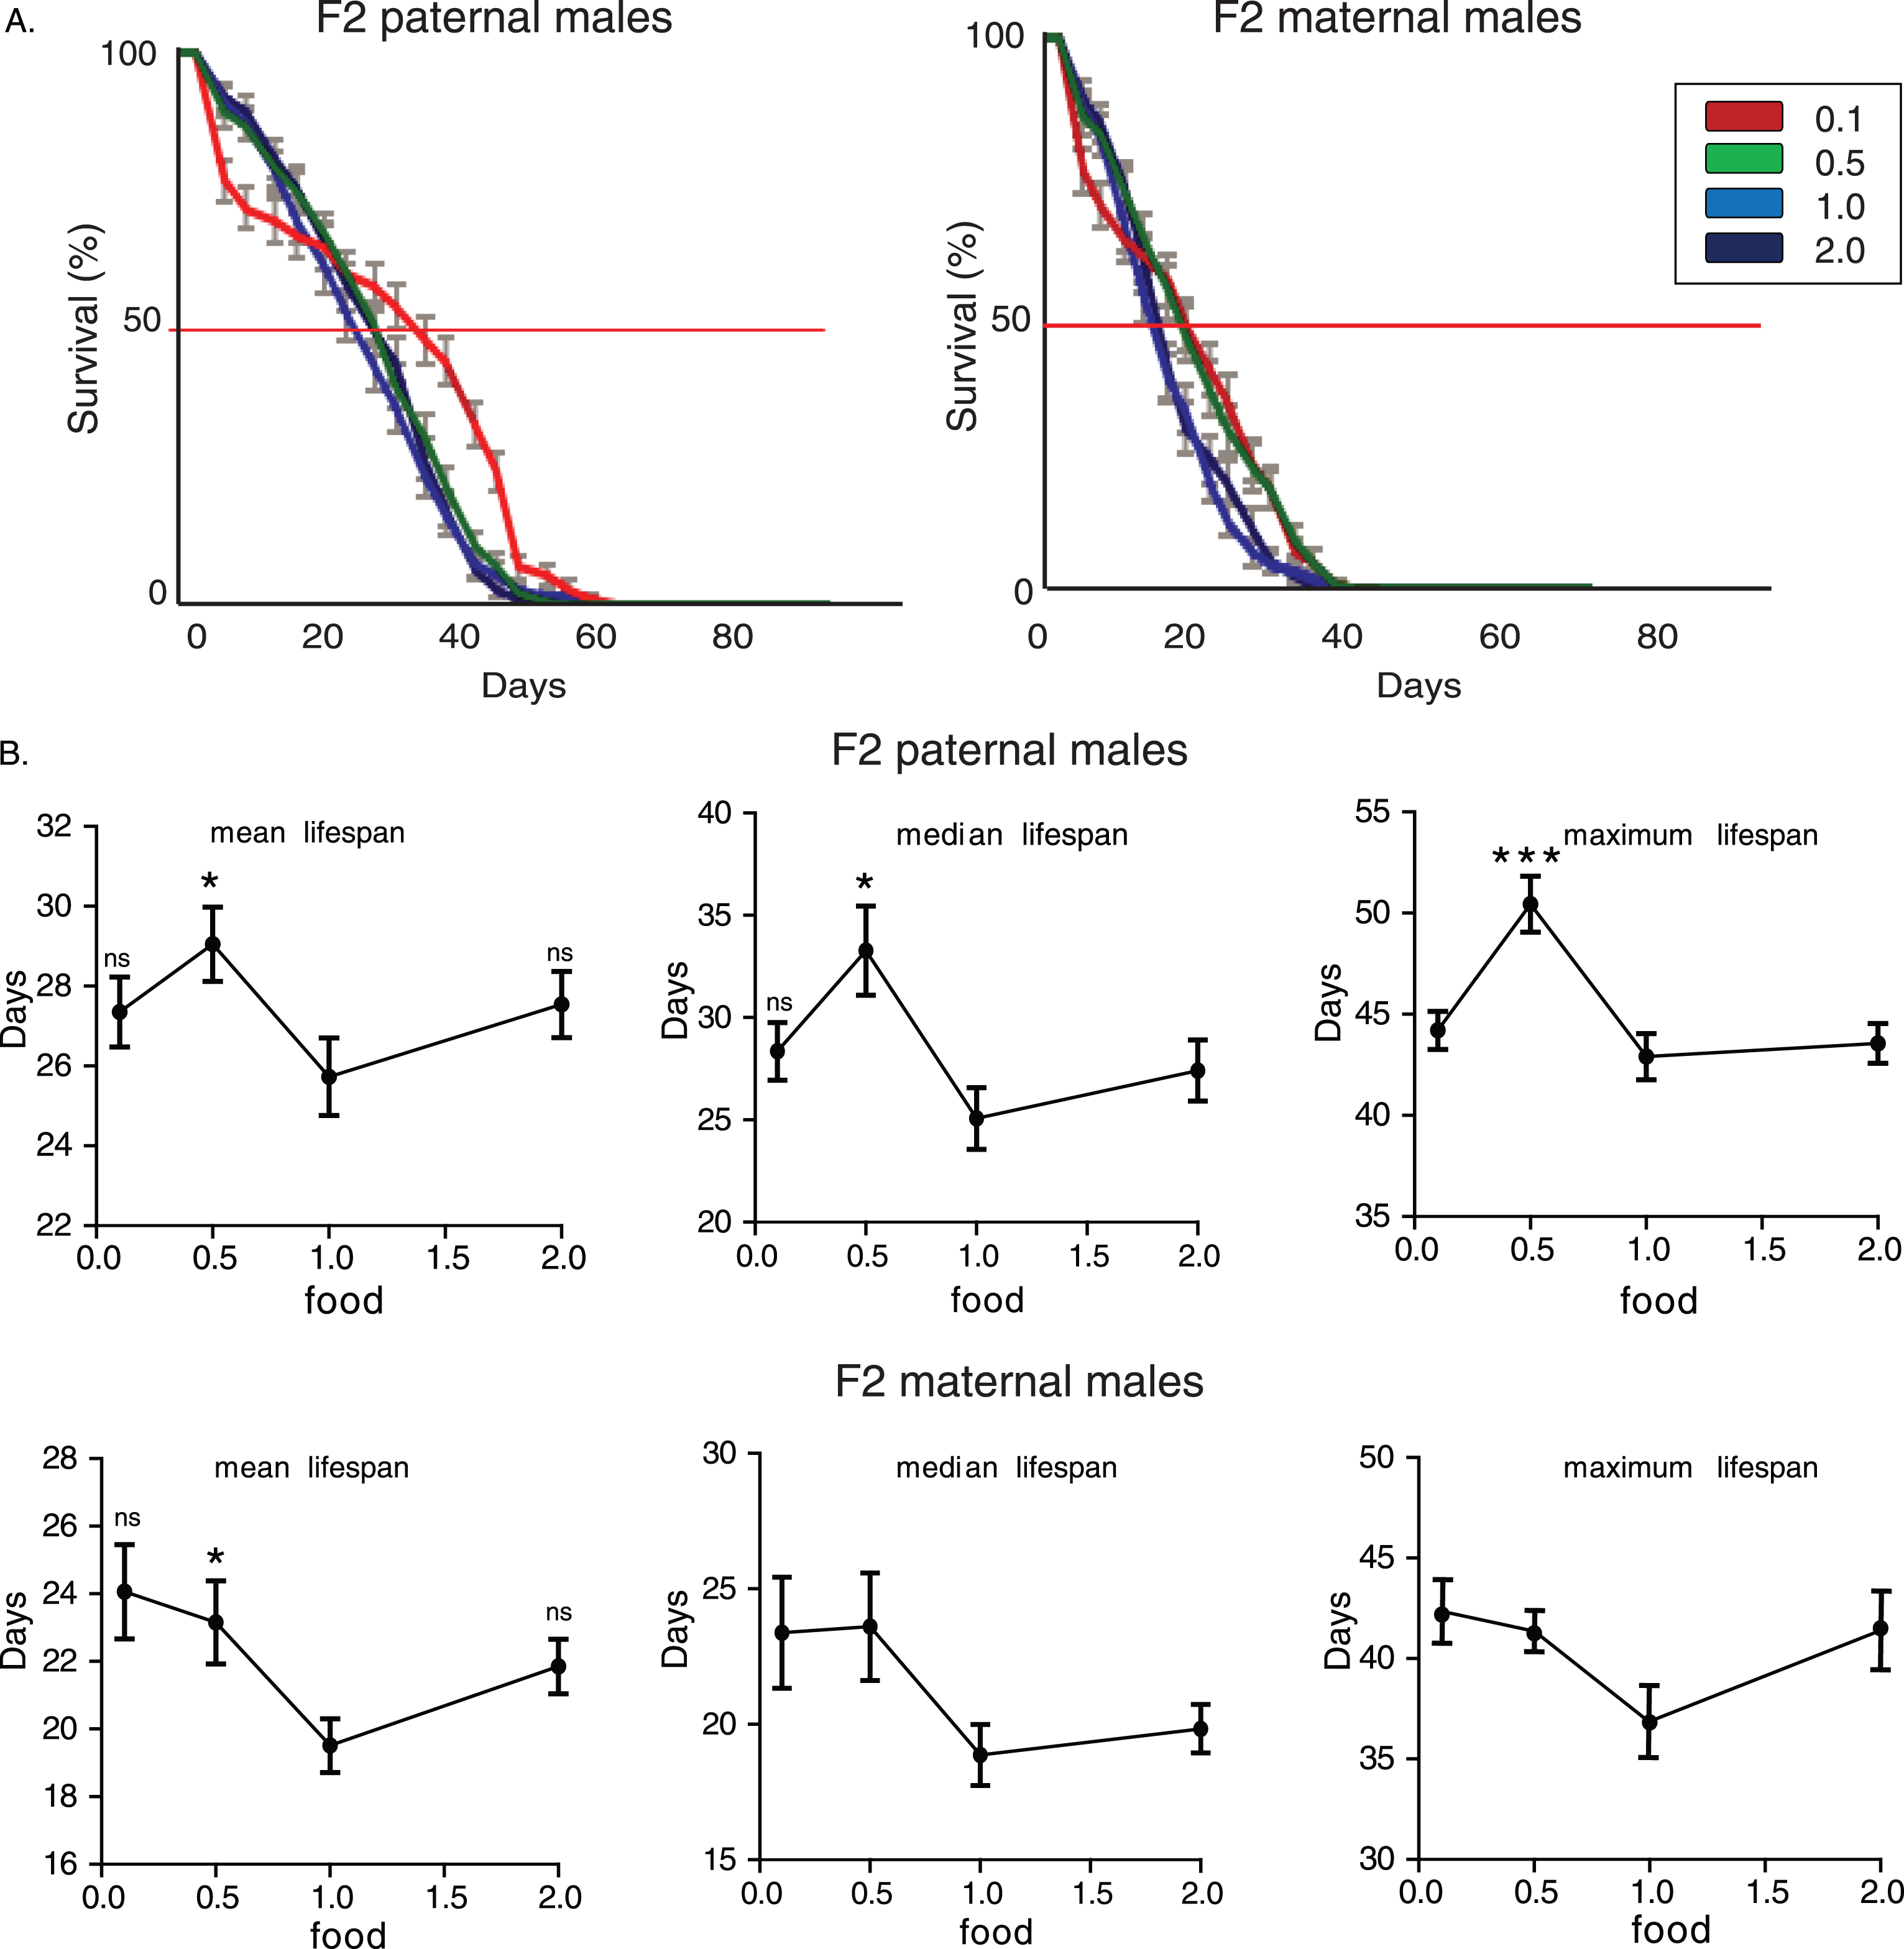 Dietary restriction during adulthood induces transgenerational effects on longevity. A) Lifespan curves of F2 males from paternal and maternal grandfathers subjected to different dietary regimes through adult stages. F2 virgin males whose paternal grandfathers had experienced starvation through adult stages lived longer; F2 (paternal) 0.1 vs.. 0.5: p < 1.47×10–9, F2 (paternal) 0.1 vs.. 1.0: p < 3.6×10–10 and F2 (paternal) 0.1 vs.. 2.0: p < 3×10–12, log rank test. In F2 maternal males, dietary restriction and starvation of F0 males induced similar effects; F2 (maternal) 0.5 vs. 0.1: p > 0.9, F2 (maternal) 0.5 vs. 1.0: p < 8×10–7, F2 (maternal) 0.5 vs. 2.0: p < 0.0049, F2 (maternal) 0.1 vs. 1.0: p < 1×10–6, F2 (maternal) 0.1 vs. 2.0: p < 0.0049, log rank test. Lifespan data shown are from a single trial. For each lifespan experiment n > 260. Error bars indicate SEM. B) Mean, median and maximum lifespan of F2 males from paternal and maternal grandfathers exposed to different dietary conditions during adulthood. F2 (paternal) 0.5 vs. 0.1: p < 0.001, q = 4.097, for maximum lifespan, F2 (paternal) 0.5 vs. 1.0: p < 0.05, q = 2.512, p < 0.01, q = 3.326, p < 0.001, q = 4.6 for mean, median and maximum lifespan, F2 (paternal) 0.5 vs. 2.0: p < 0.05, q = 2.456 and p < 0.001, q = 4.34, for median and maximum lifespan. F2 (maternal) 0.5 vs. 1.0: p < 0.05, q = 2.457 for mean lifespan, F2 (maternal) 0.1 vs. 1.0: p < 0.05, q = 2.95, for mean lifespan, one-way ANOVA with Dunnett’s multiple comparison against F2 0.5 flies. For each lifespan experiment n > 13, *p < 0.05, ***p < 0.001. Error bars indicate SEM.